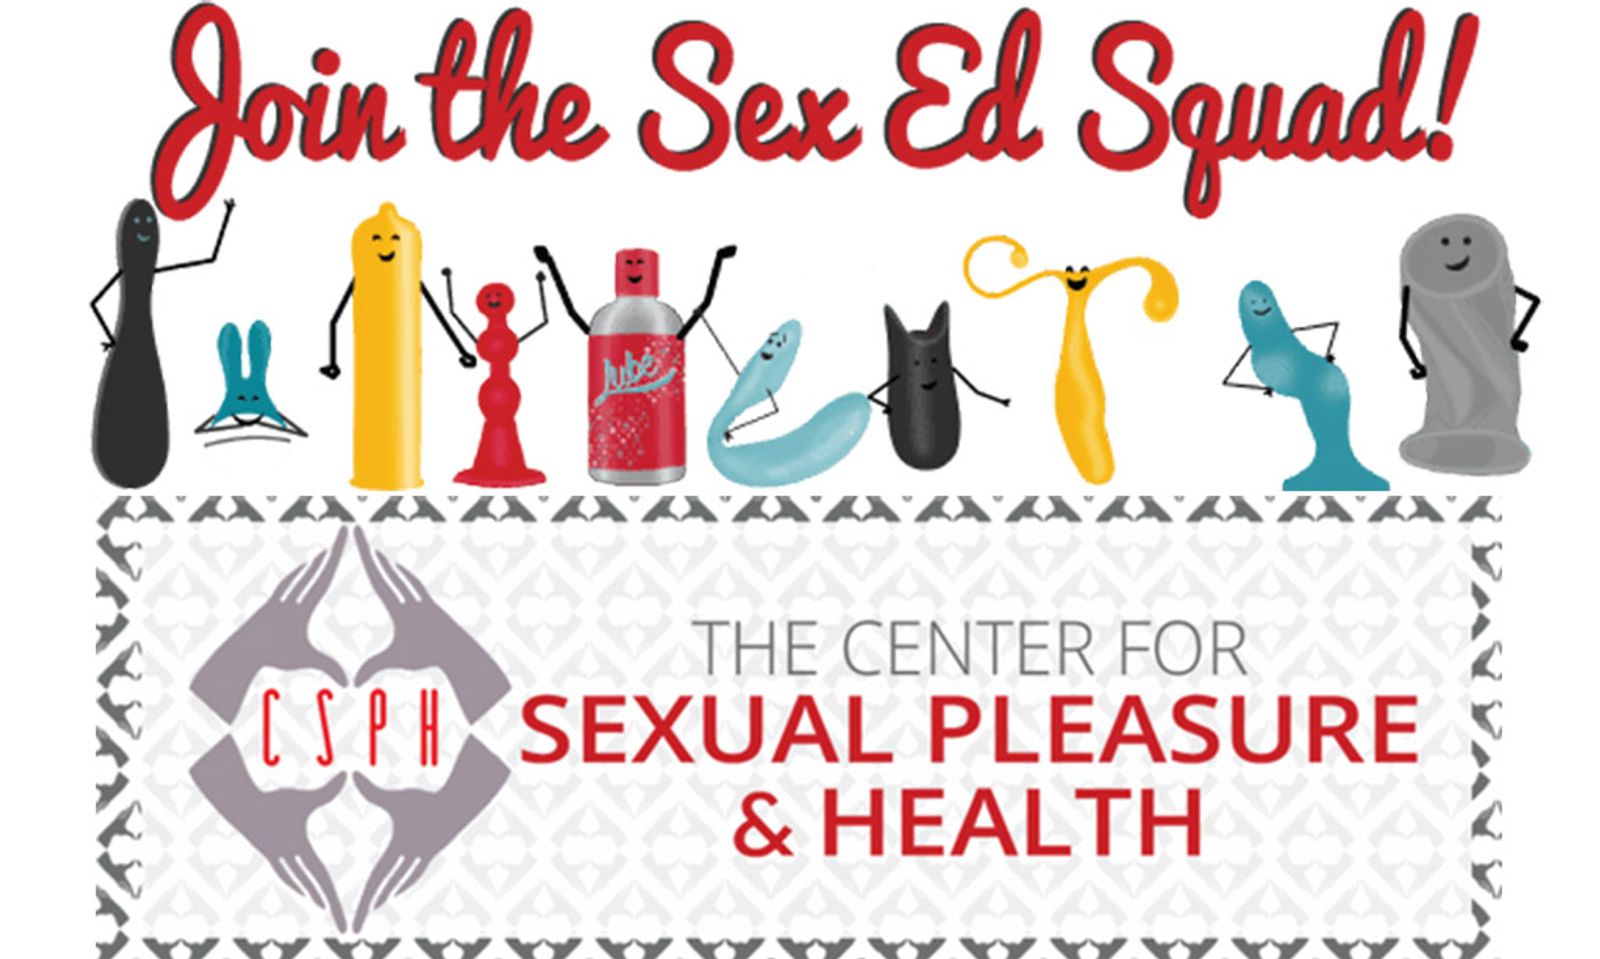 On #GivingTuesday, Make CSPH Your 'Swear Jar For Sex Shaming'